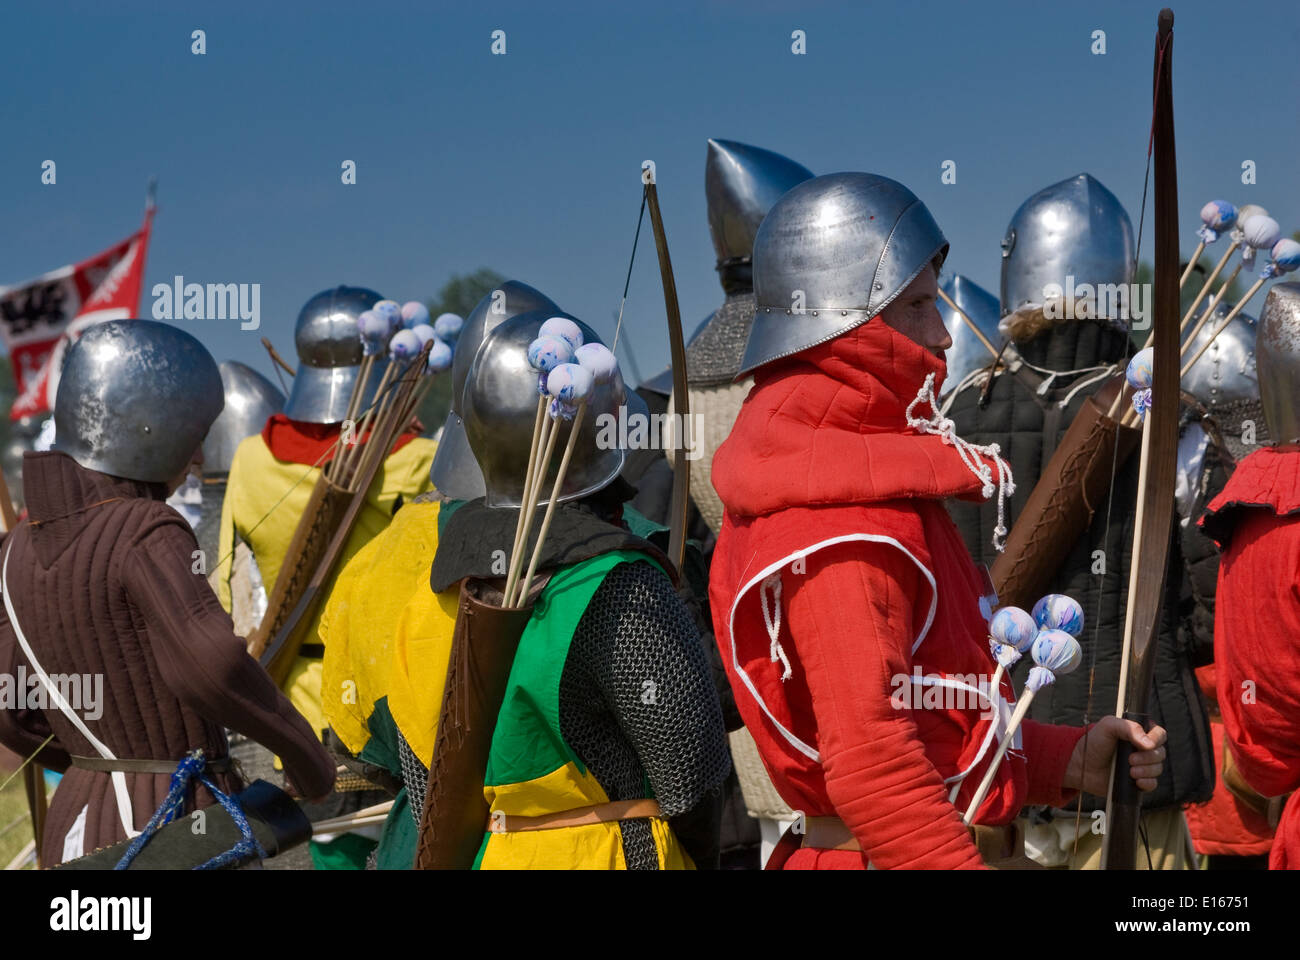 Annual recreation of Battle of Grunwald of 1410, when Polish-Lithuanian troops defeated Teutonic Knights, Grunwald, Poland Stock Photo